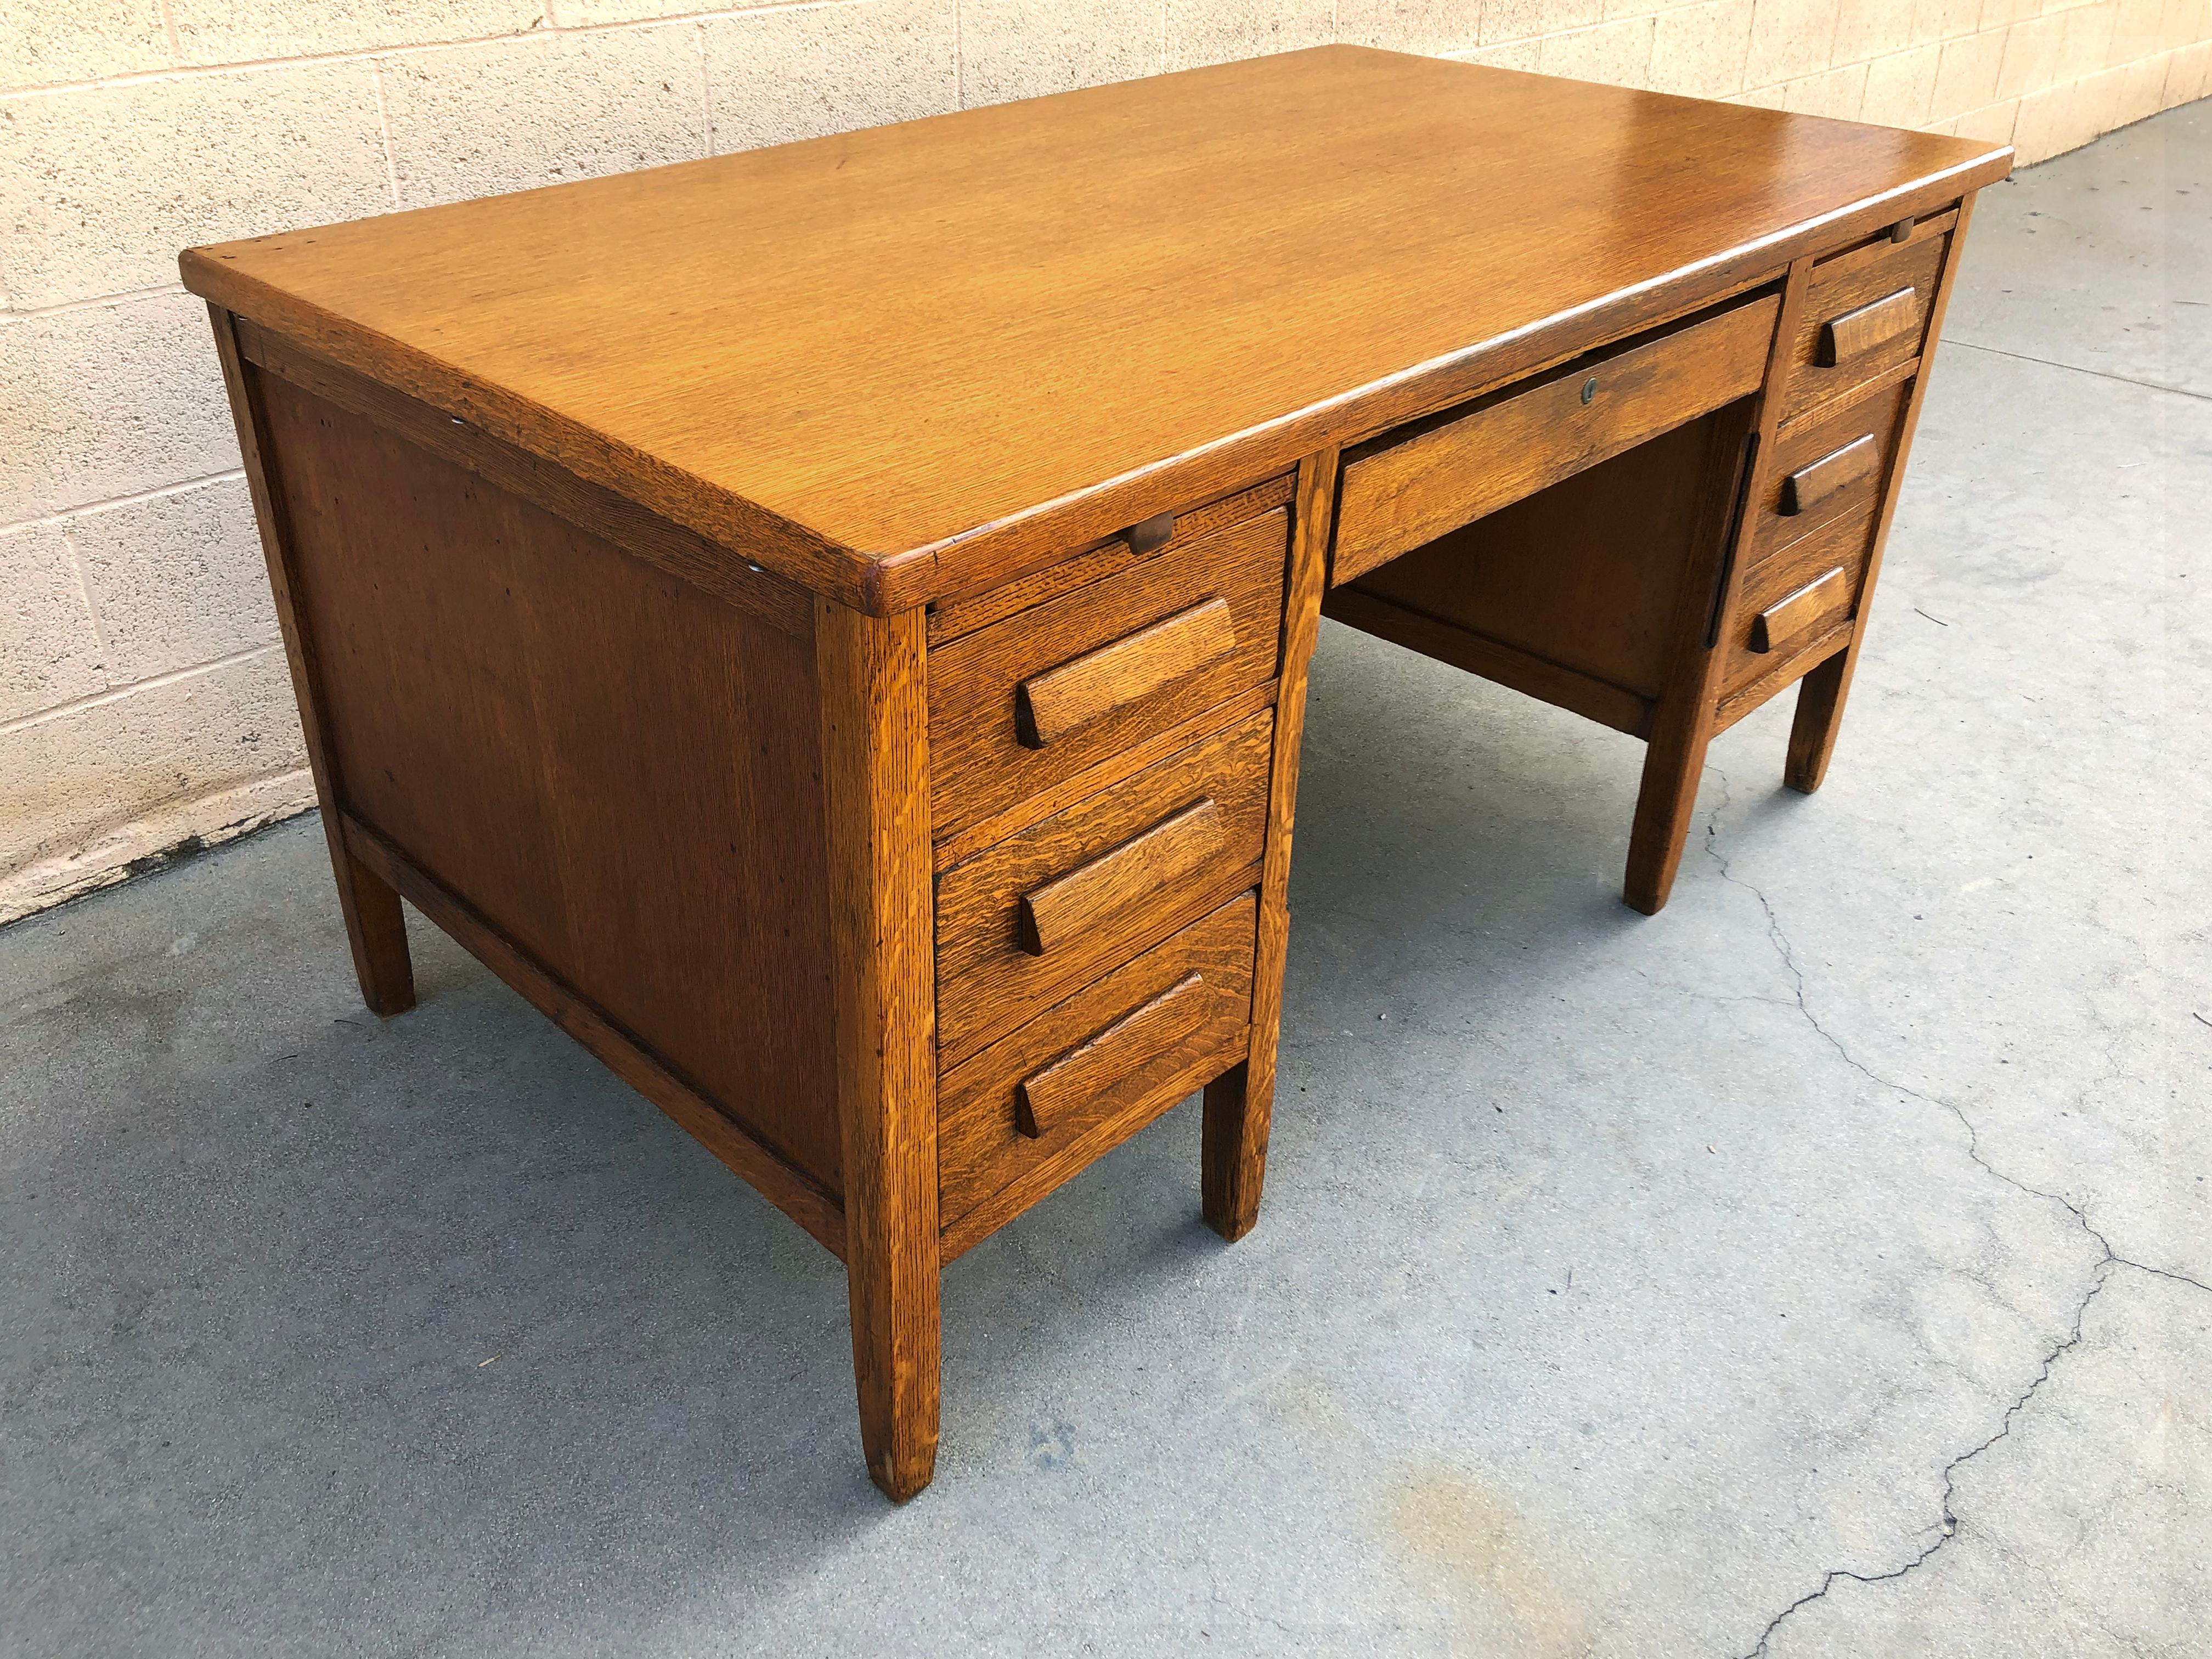 1920s teachers desk made of solid golden oak. Well made in a straight and simple Arts Crafts/ Mission style. Features double pedestal configuration with four storage drawers, a filing drawer, center utility drawer and two pull-out writing trays.